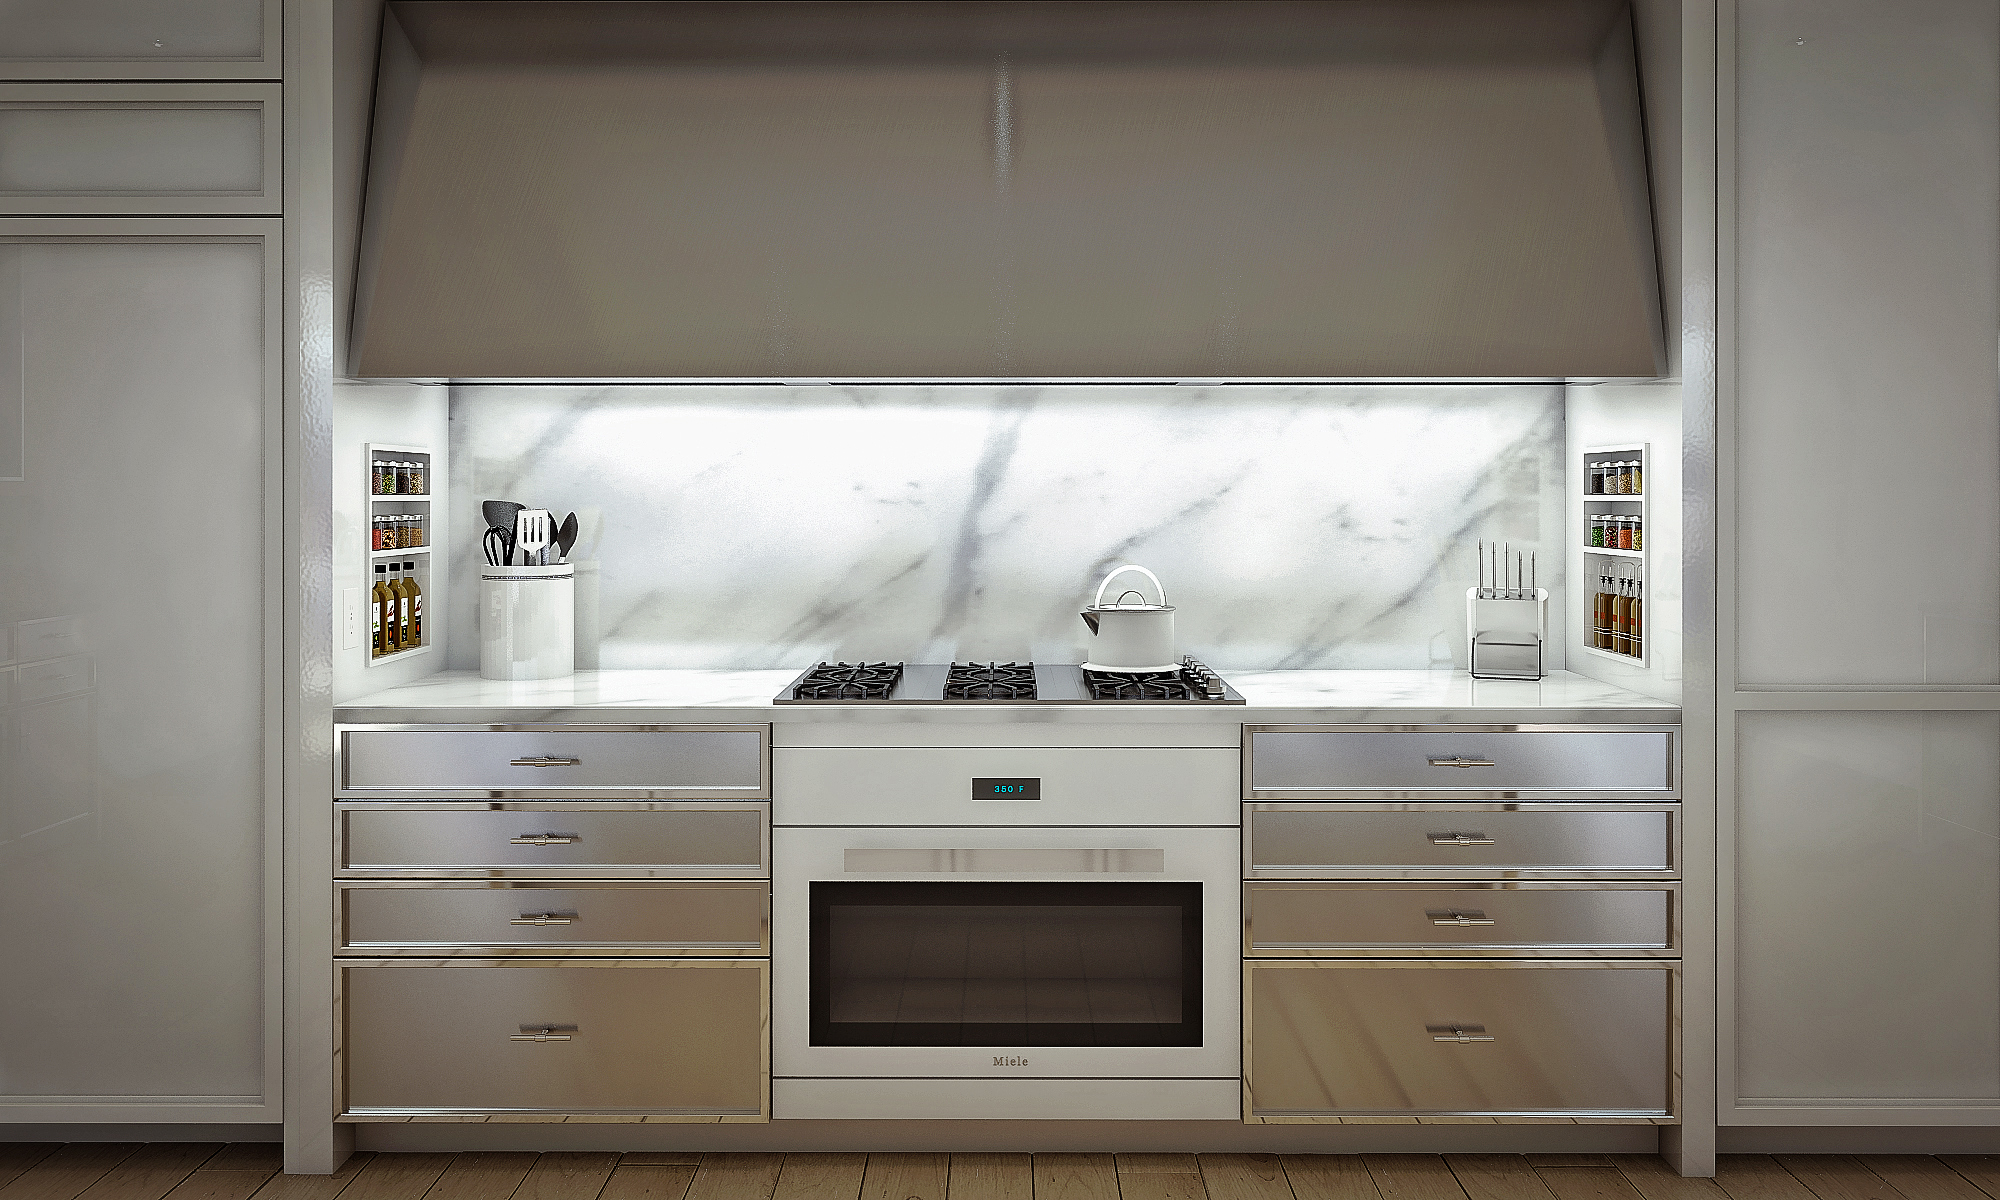 ARCHITECTURAL IMAGERY_IRP KITCHENS__06.jpg